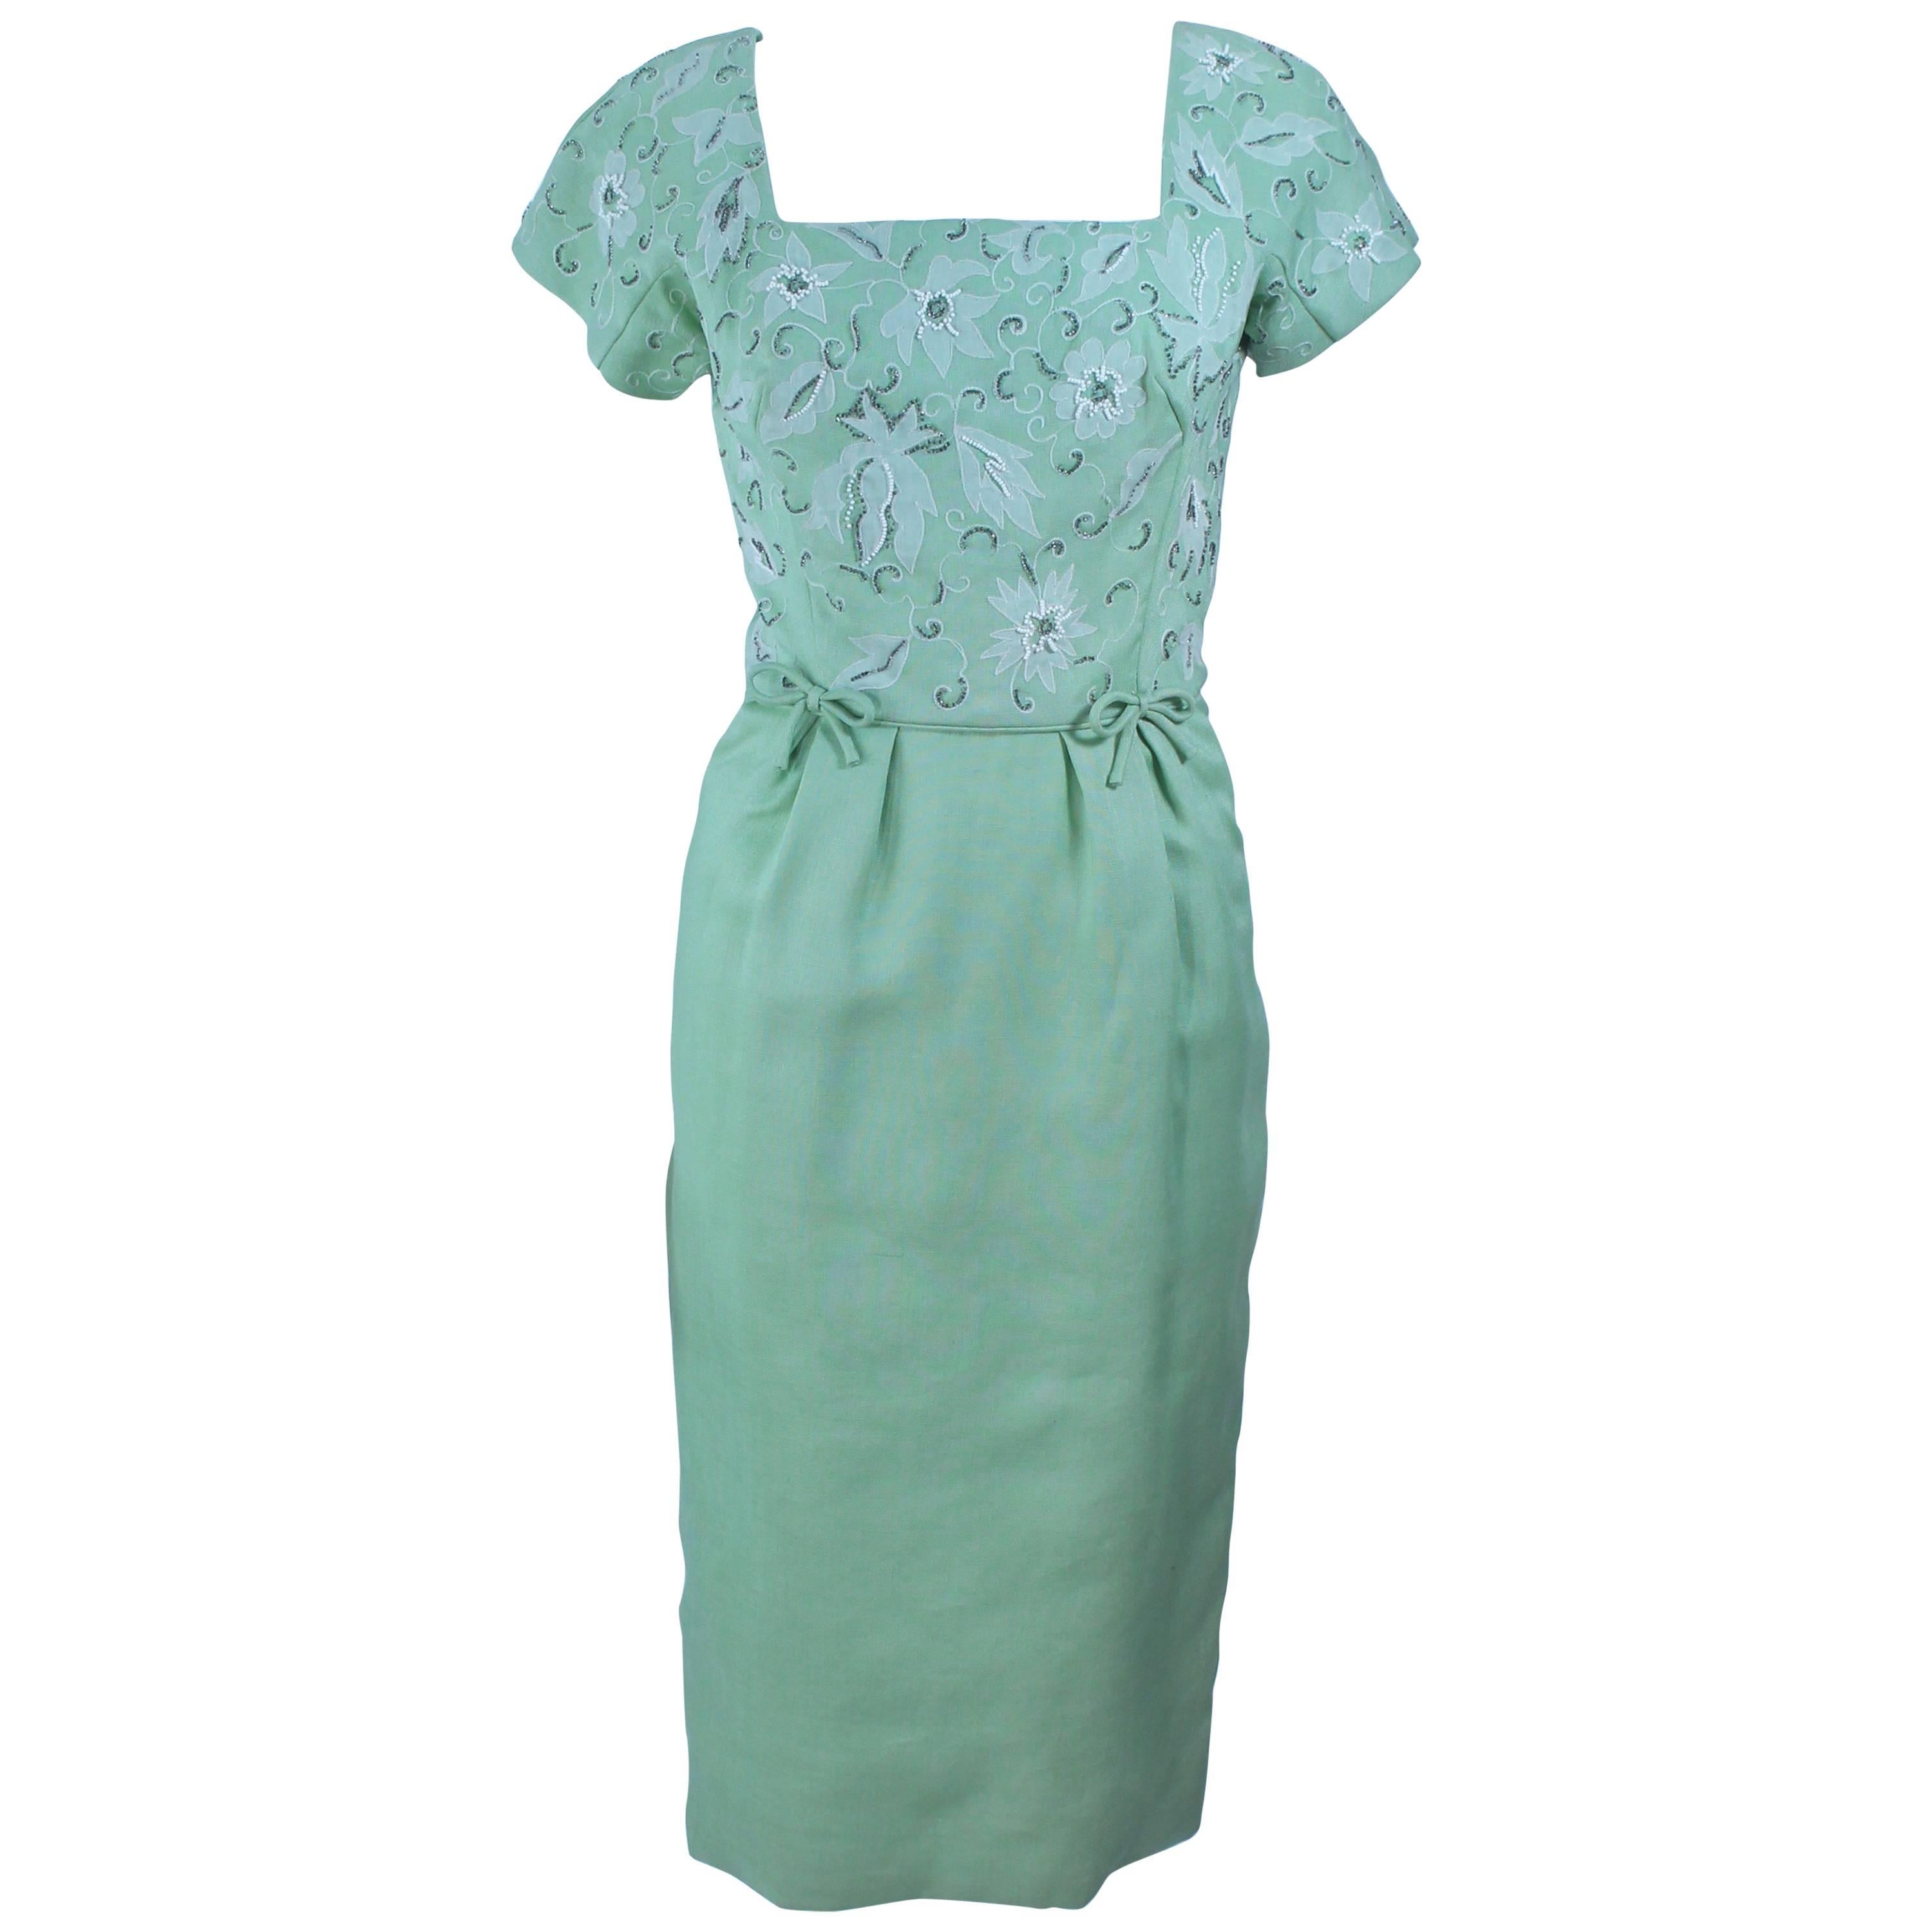 1950's Sage Green Dress with White Floral Embroidery and Beading Size 2 4 For Sale